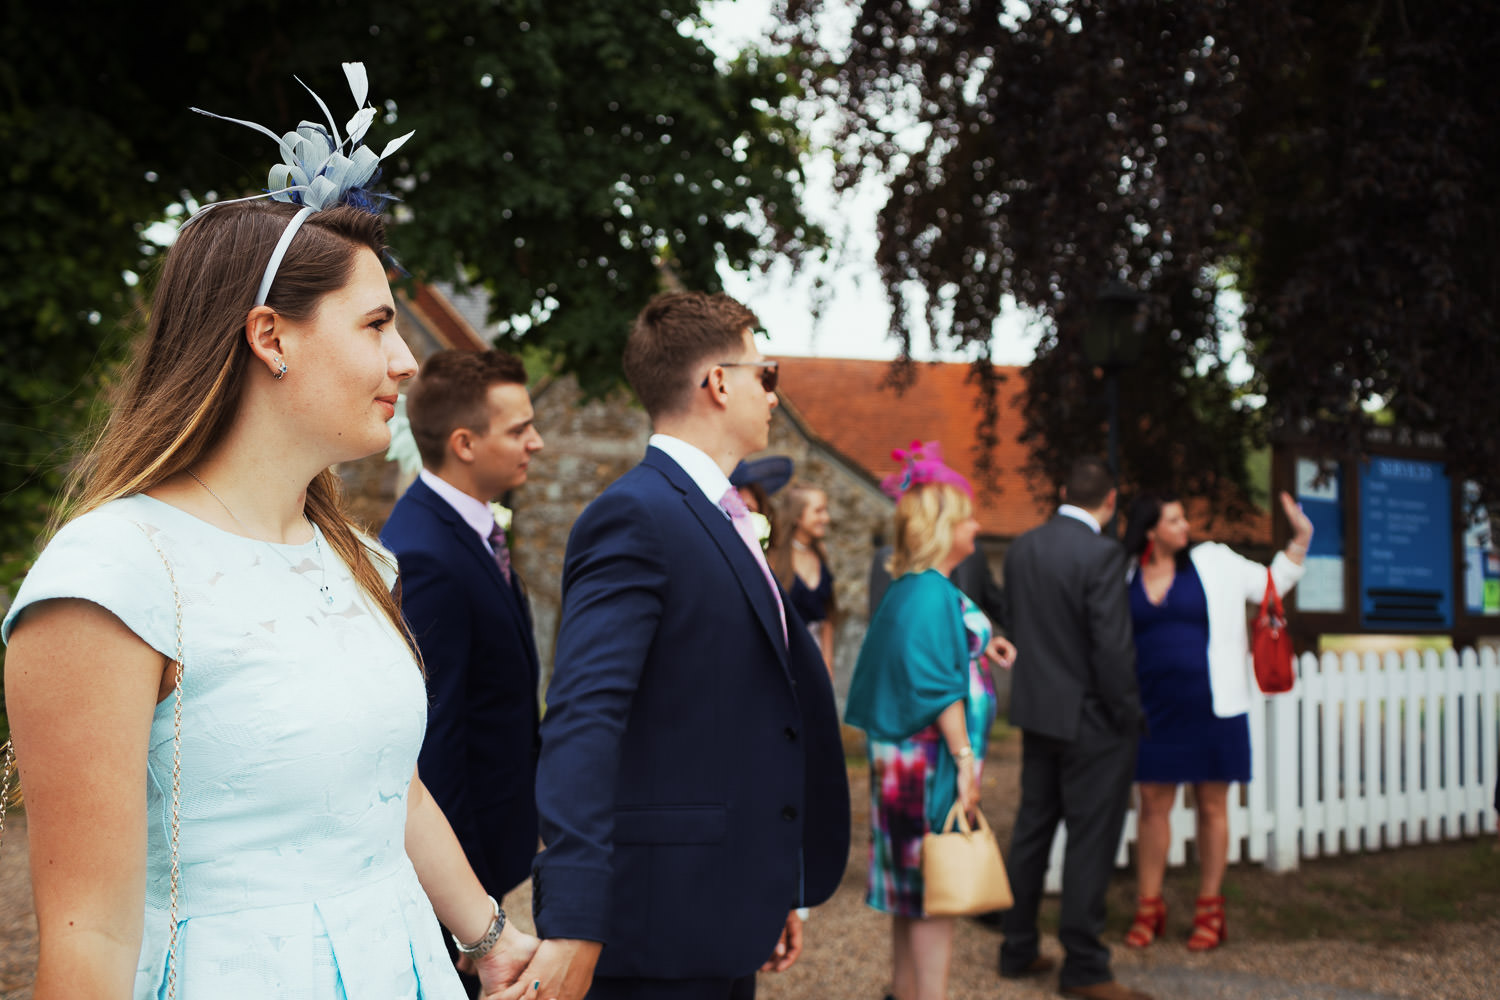 A couple holding hand outside a church. The woman is wearing a blue dress and fascinator.